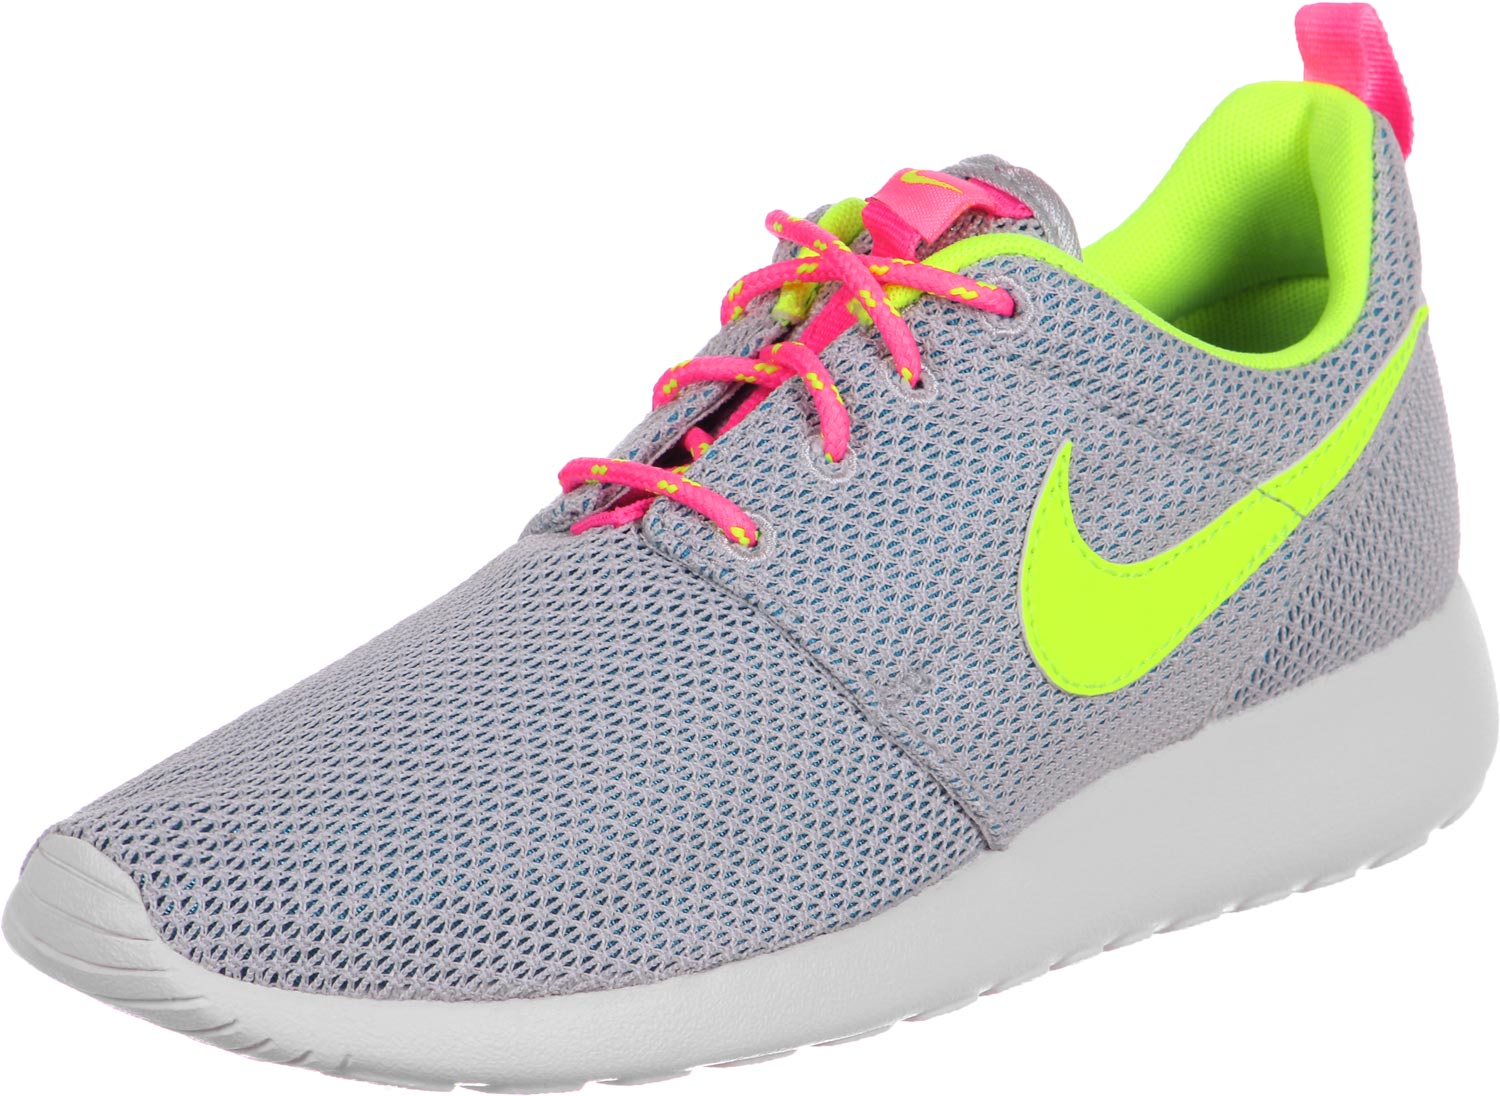 nike roshe run youth gs chaussures gris jaune, FVGTP6201680 Nike Roshe One Chaussures Gs Jeunesse Gris Jaune Online Outlet